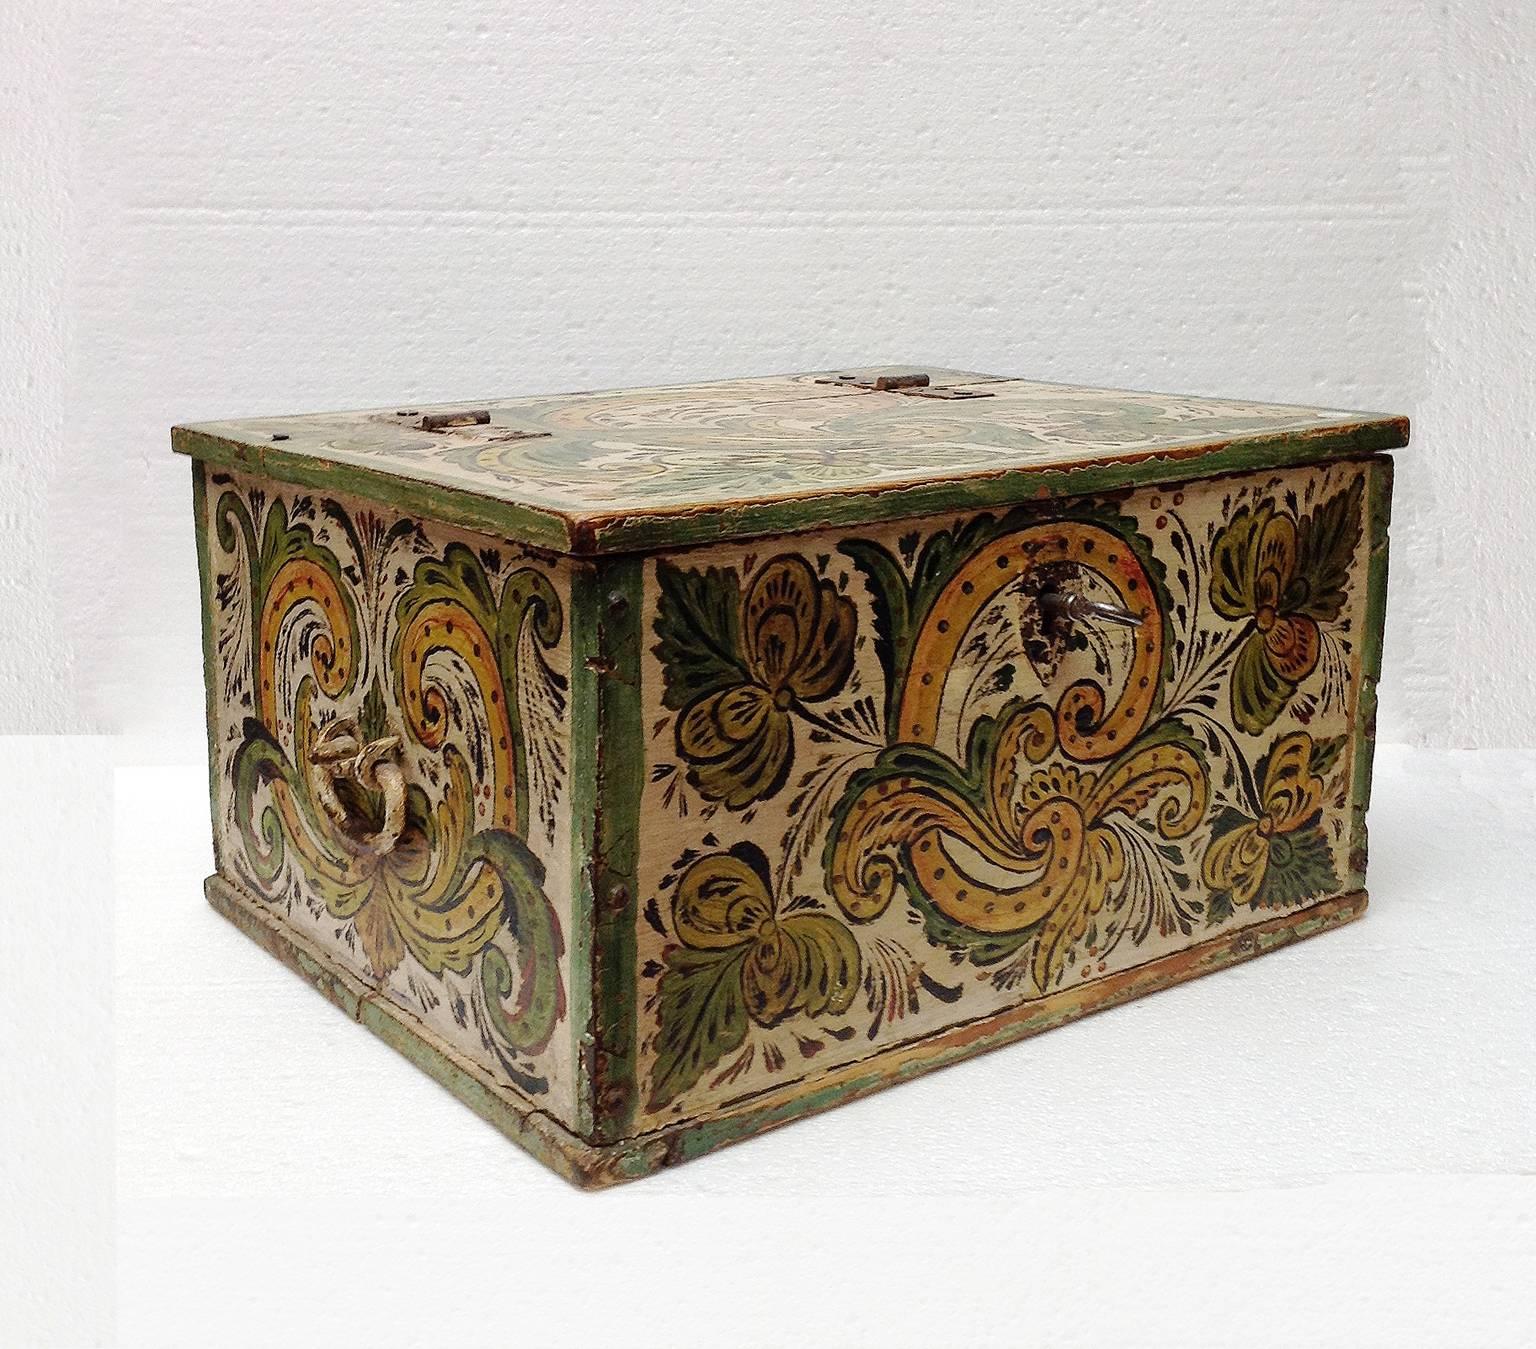 A very nicely rose painted small casket. From Telemark, Norway, 19th century.